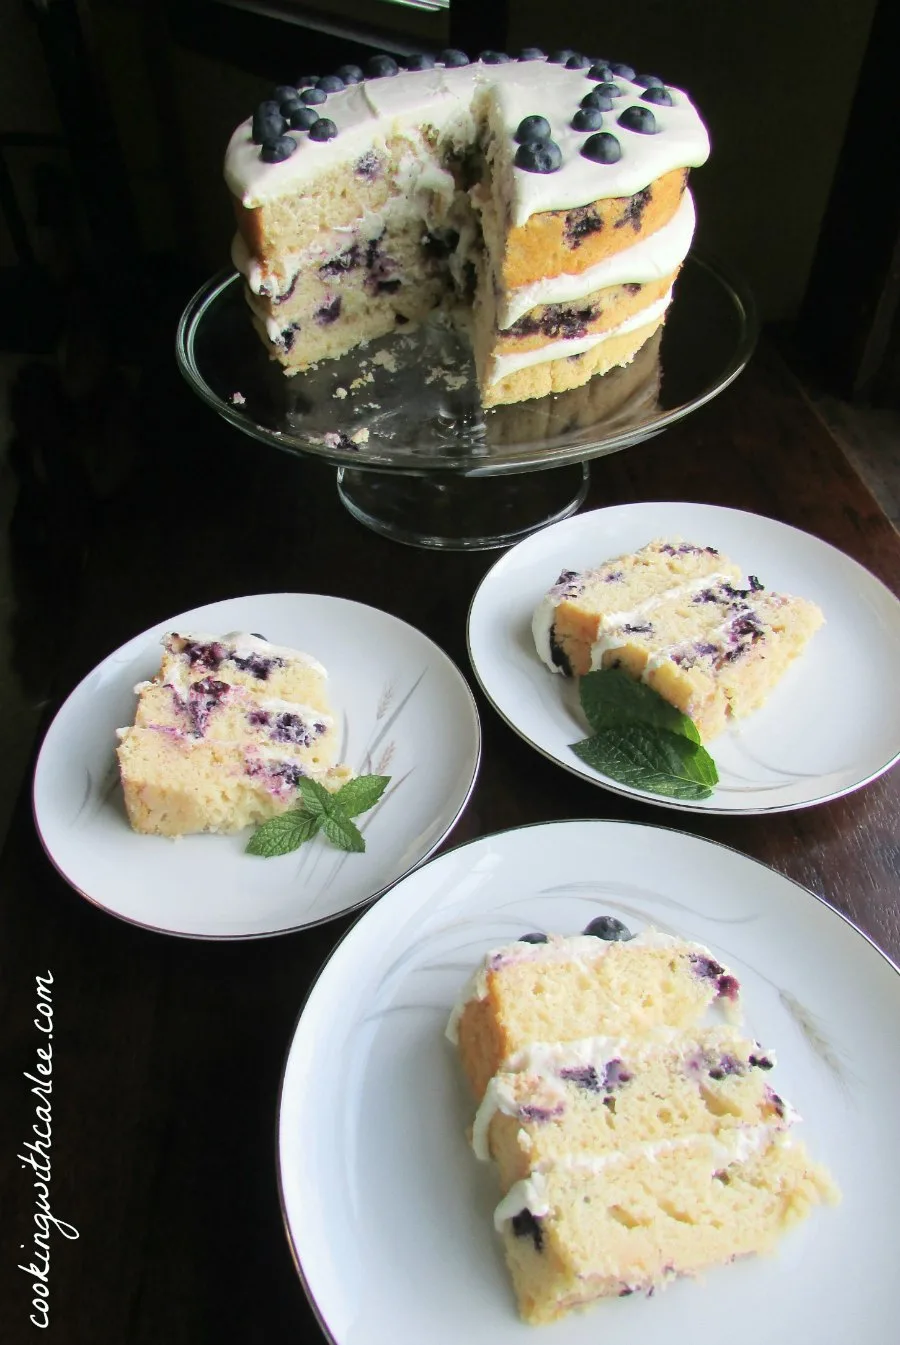 Slices of naked lemon blueberry cake with cream cheese frosting on dessert plates, ready to be served.